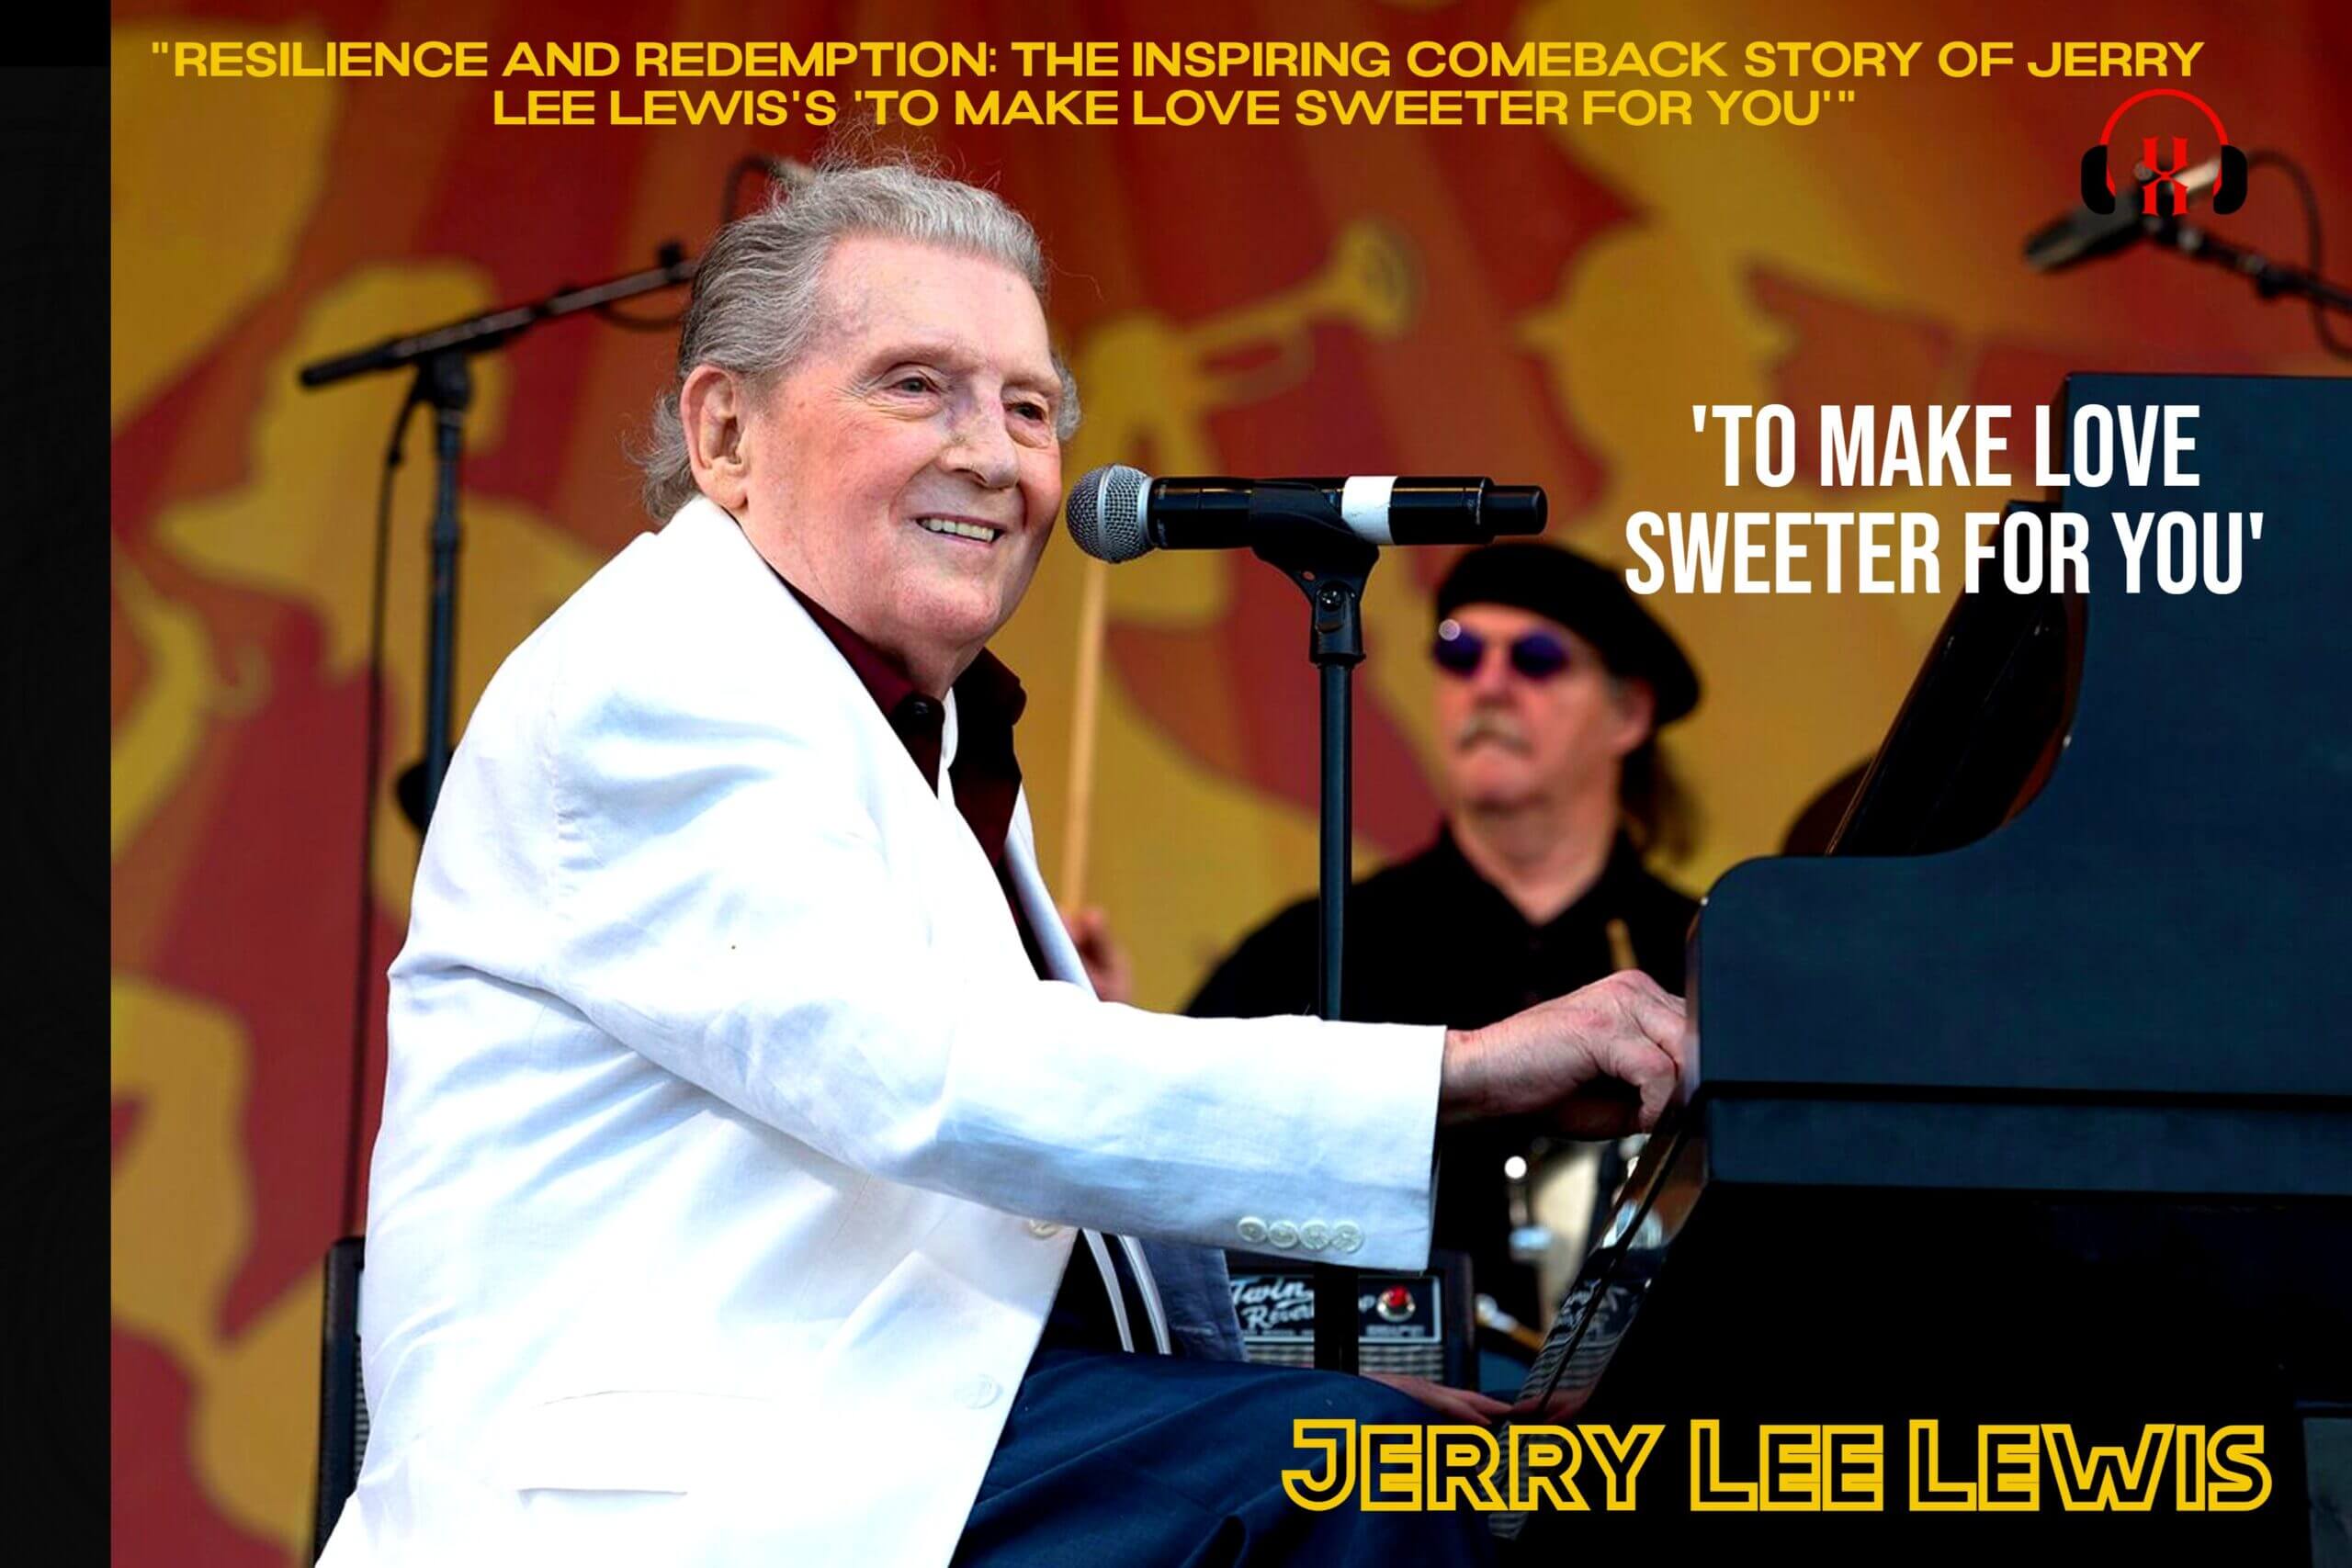 “Resilience and Redemption: The Inspiring Comeback Story of Jerry Lee Lewis’s ‘To Make Love Sweeter For You'”